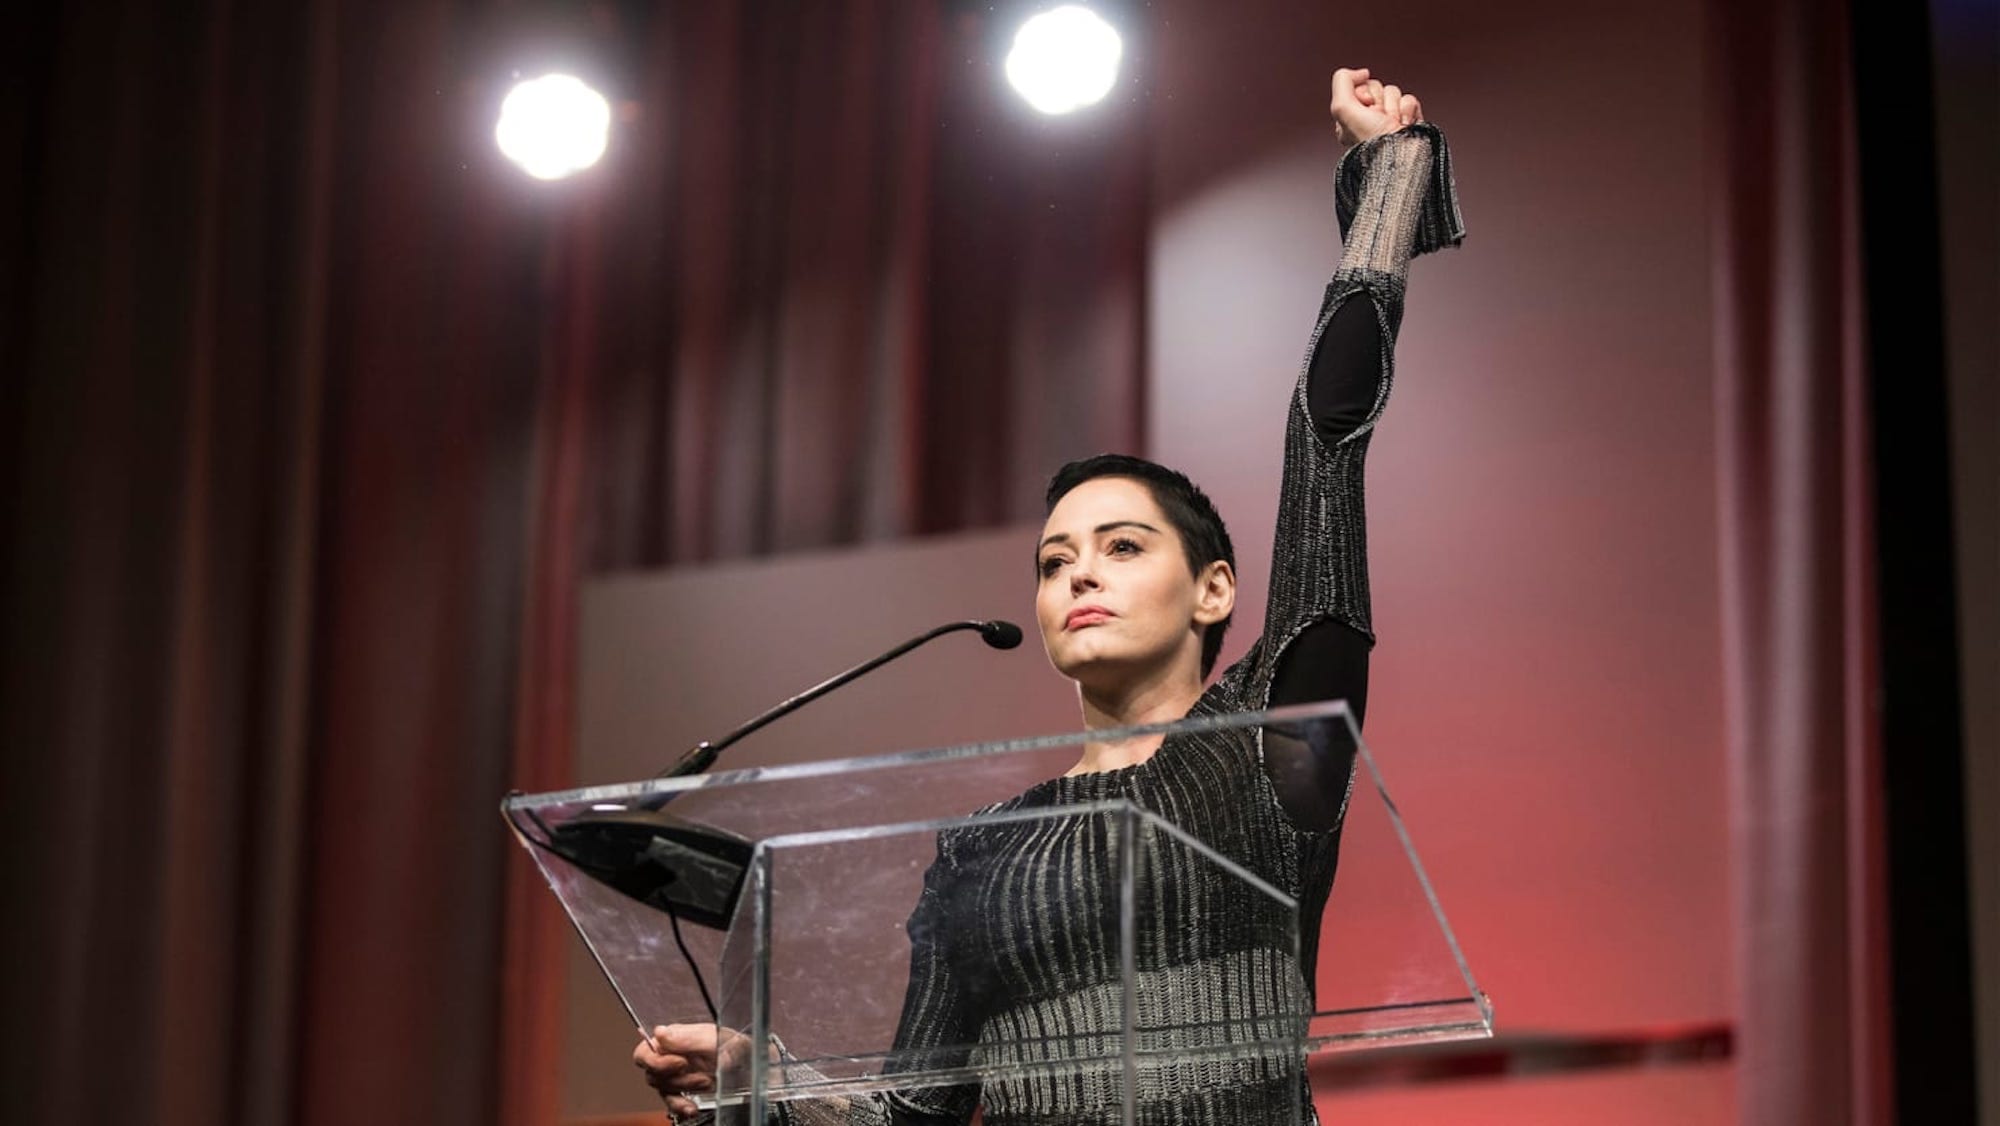 Rose McGowan’s new docuseries 'Citizen Rose' premiered last night with a two-hour episode on E! and the reviews are landing. According to The Hollywood Reporter, “McGowan leaves no stone unturned when documenting her life as an activist in the #MeToo era.”